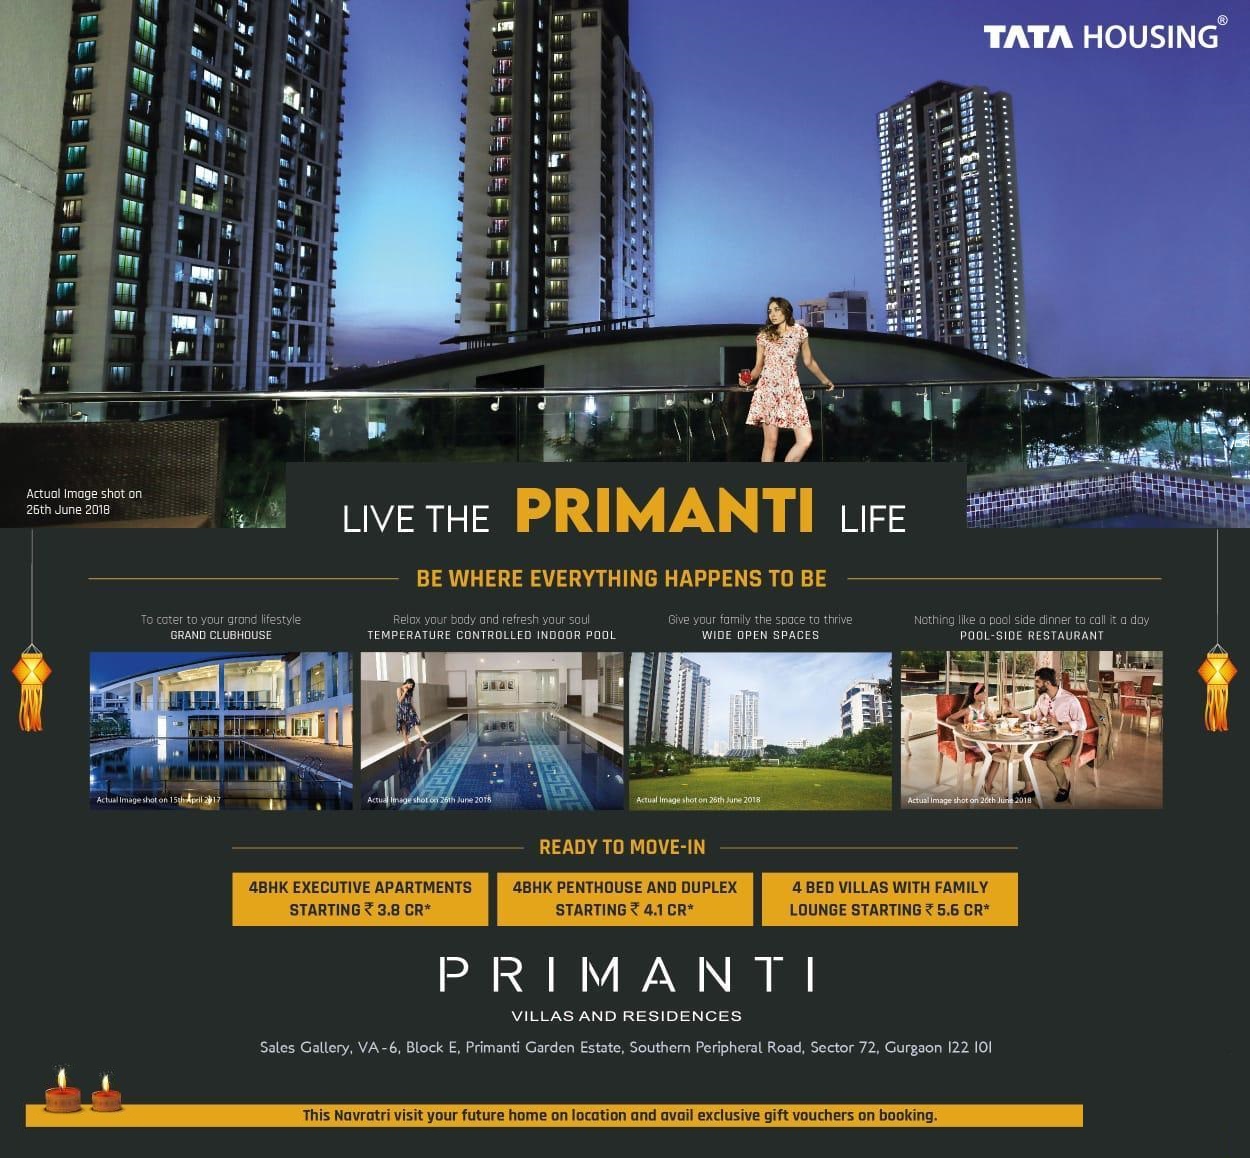 Avail special festive offer at Emaar Digihomes ini, Gurgaon Update